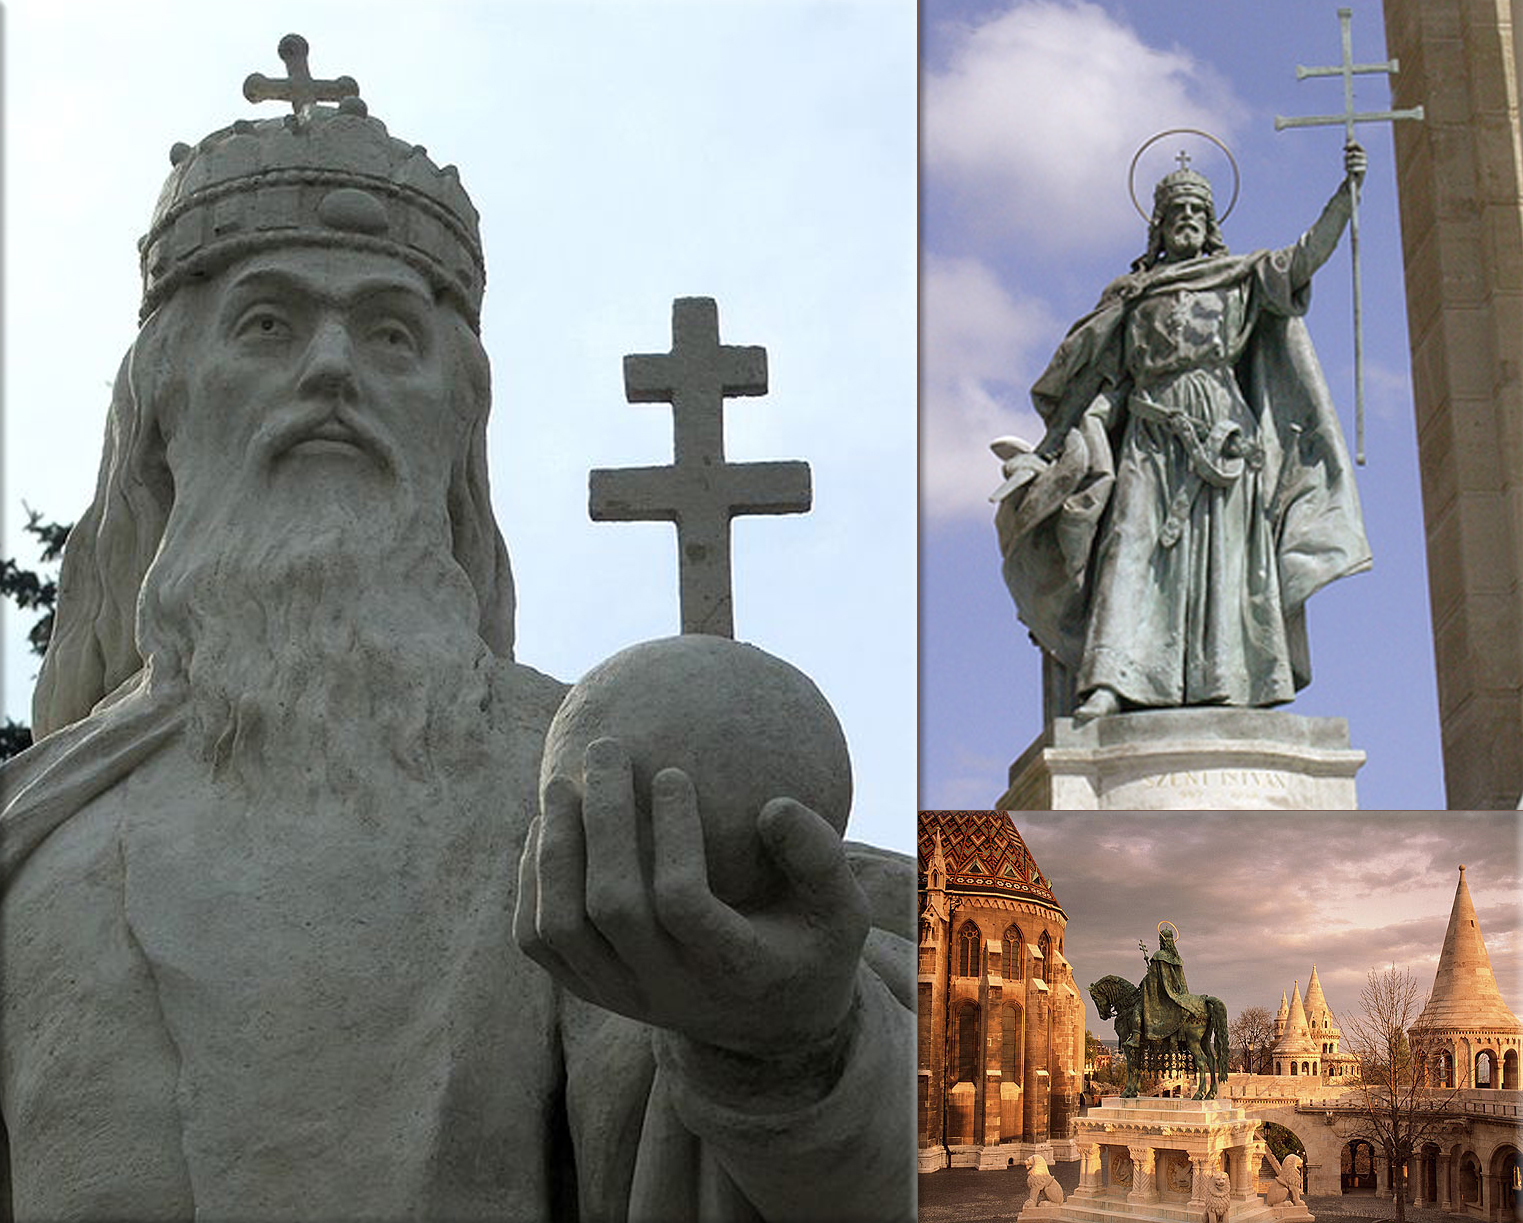 Saint Stephen< (He greatly expanded Hungarian control over the Carpathian Basin during his lifetime, broadly established Christianity in the region, and is generally regarded as the founder of the Kingdom of Hungary); Statue of Saint Stephen, Fisherman's Bastion, Budapest, Hungary. David Noton/Getty Images